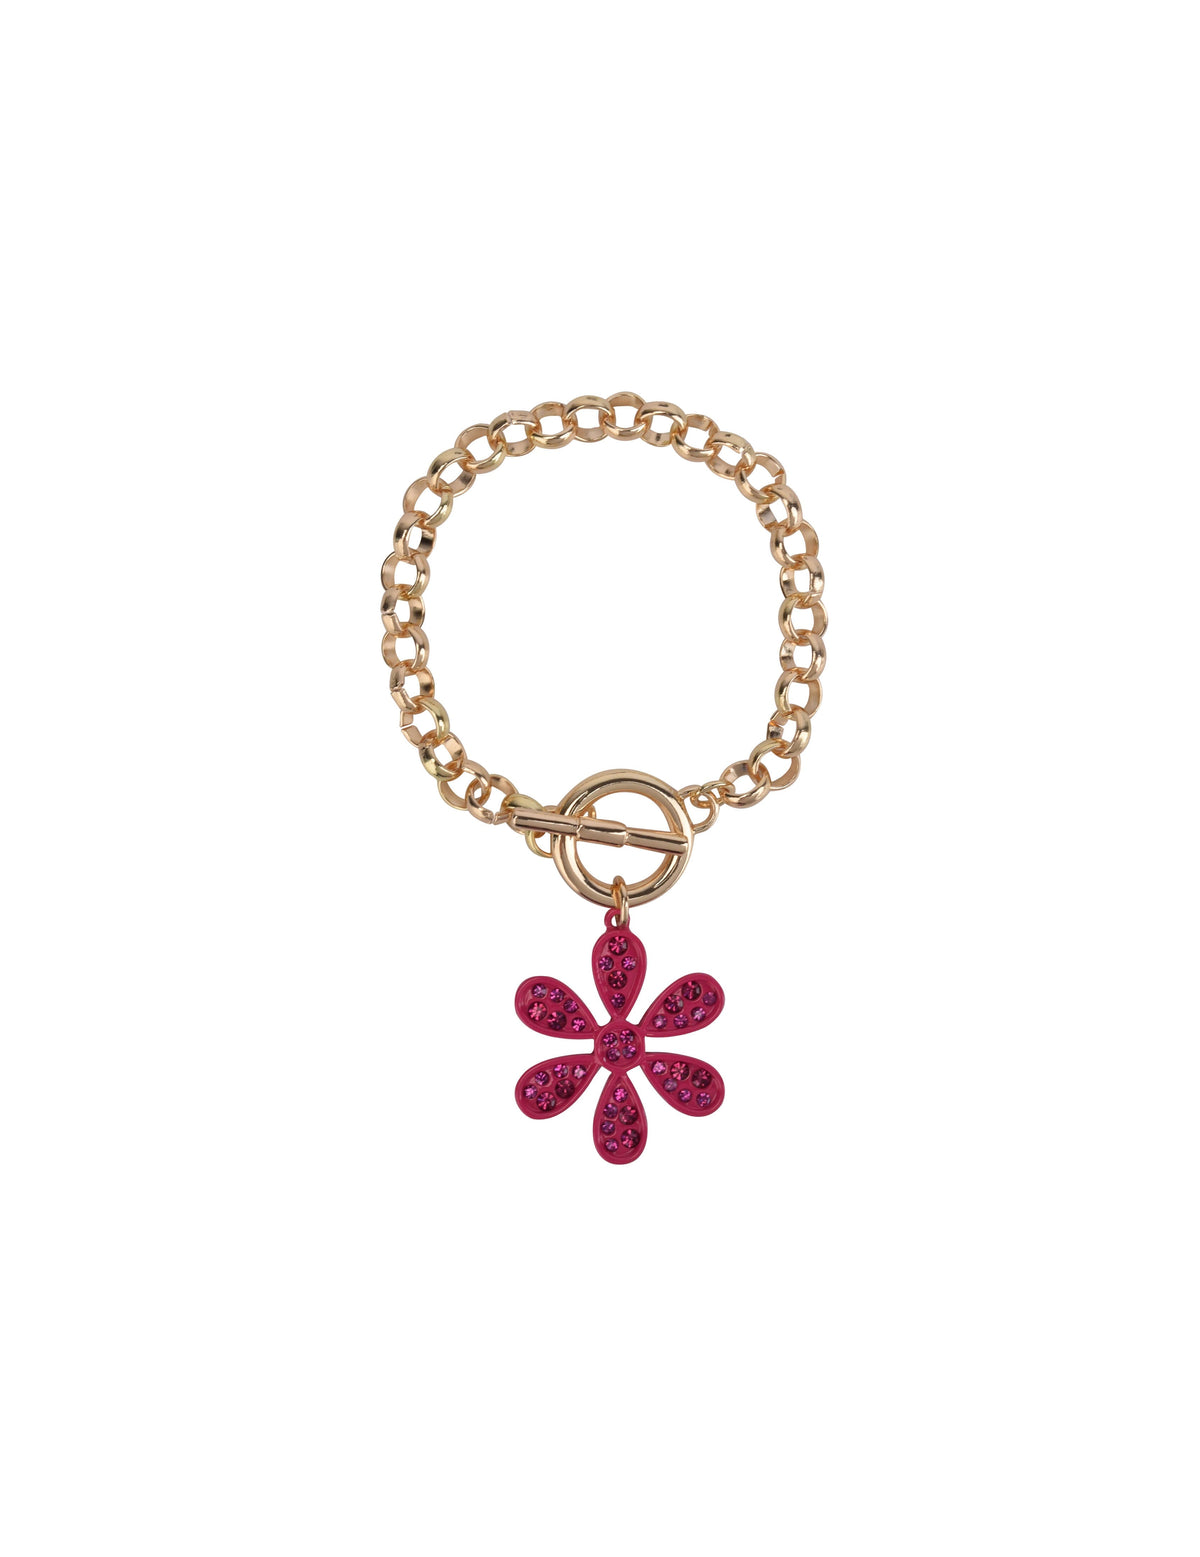 Gold Tone Toggle Bracelet with Pink Flower